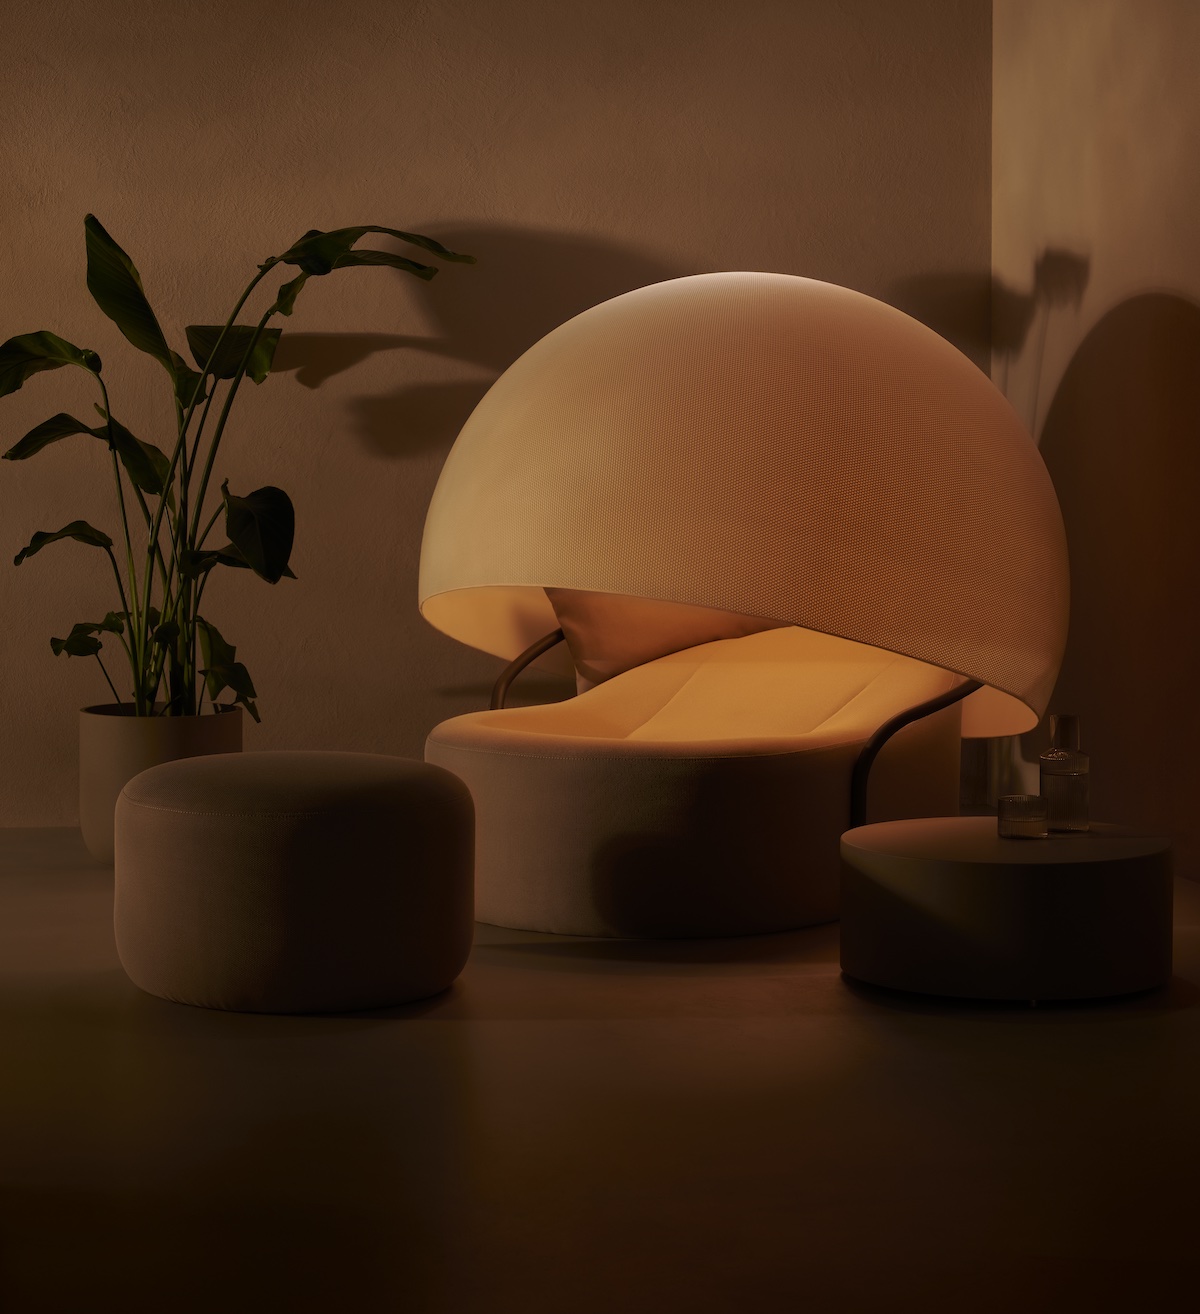 A sleep pod, designed by Hansgrohe